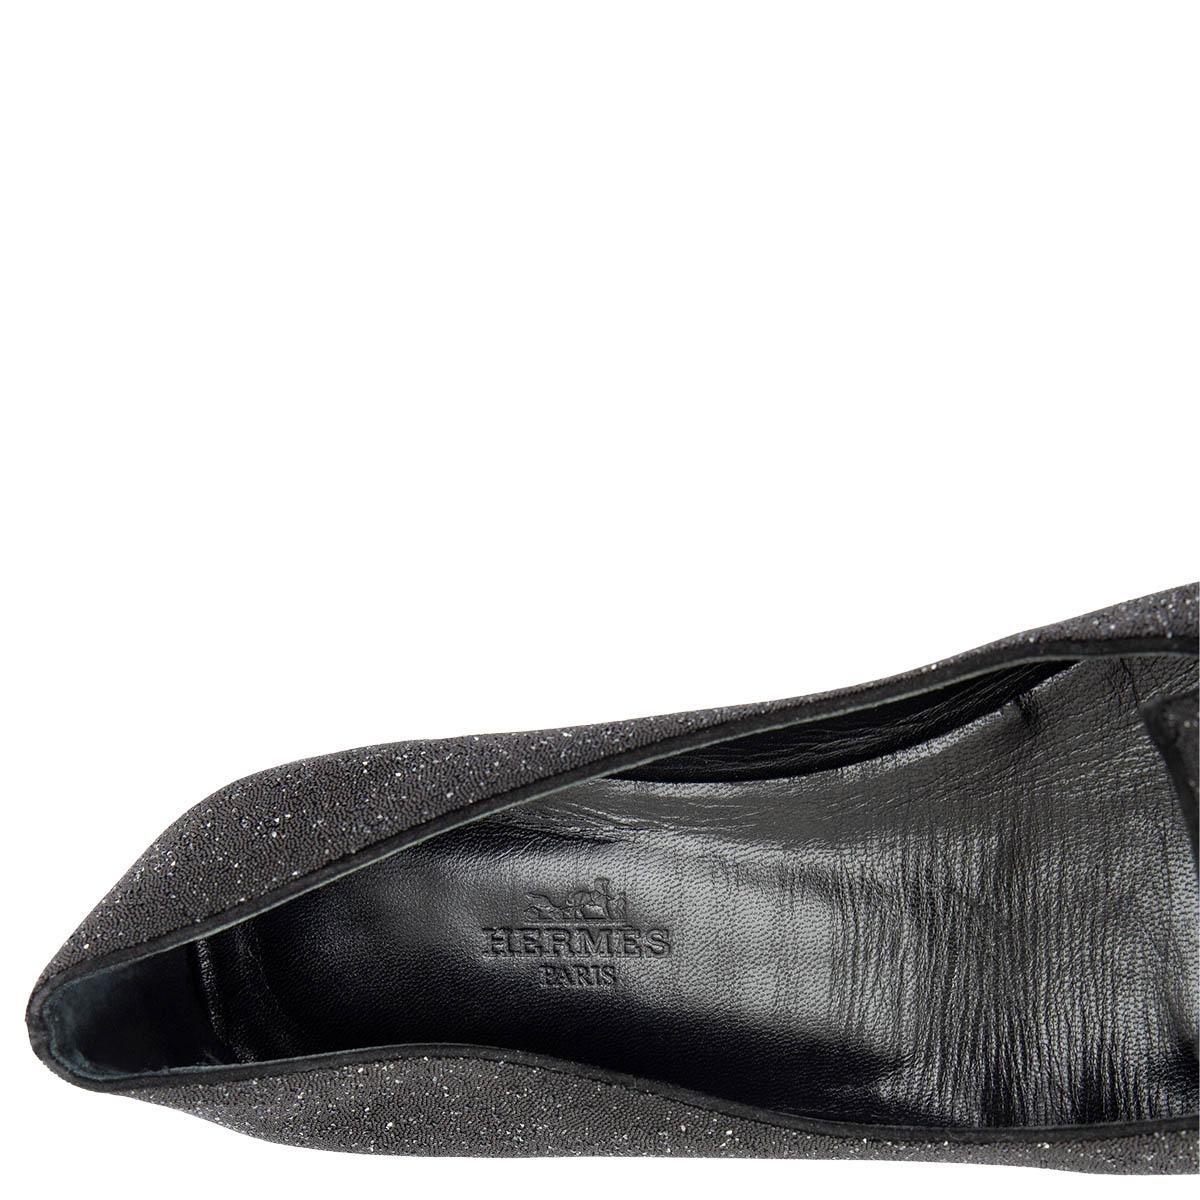 HERMES black leather HOLLY GLITTER Loafers Shoes 37.5 In Excellent Condition For Sale In Zürich, CH